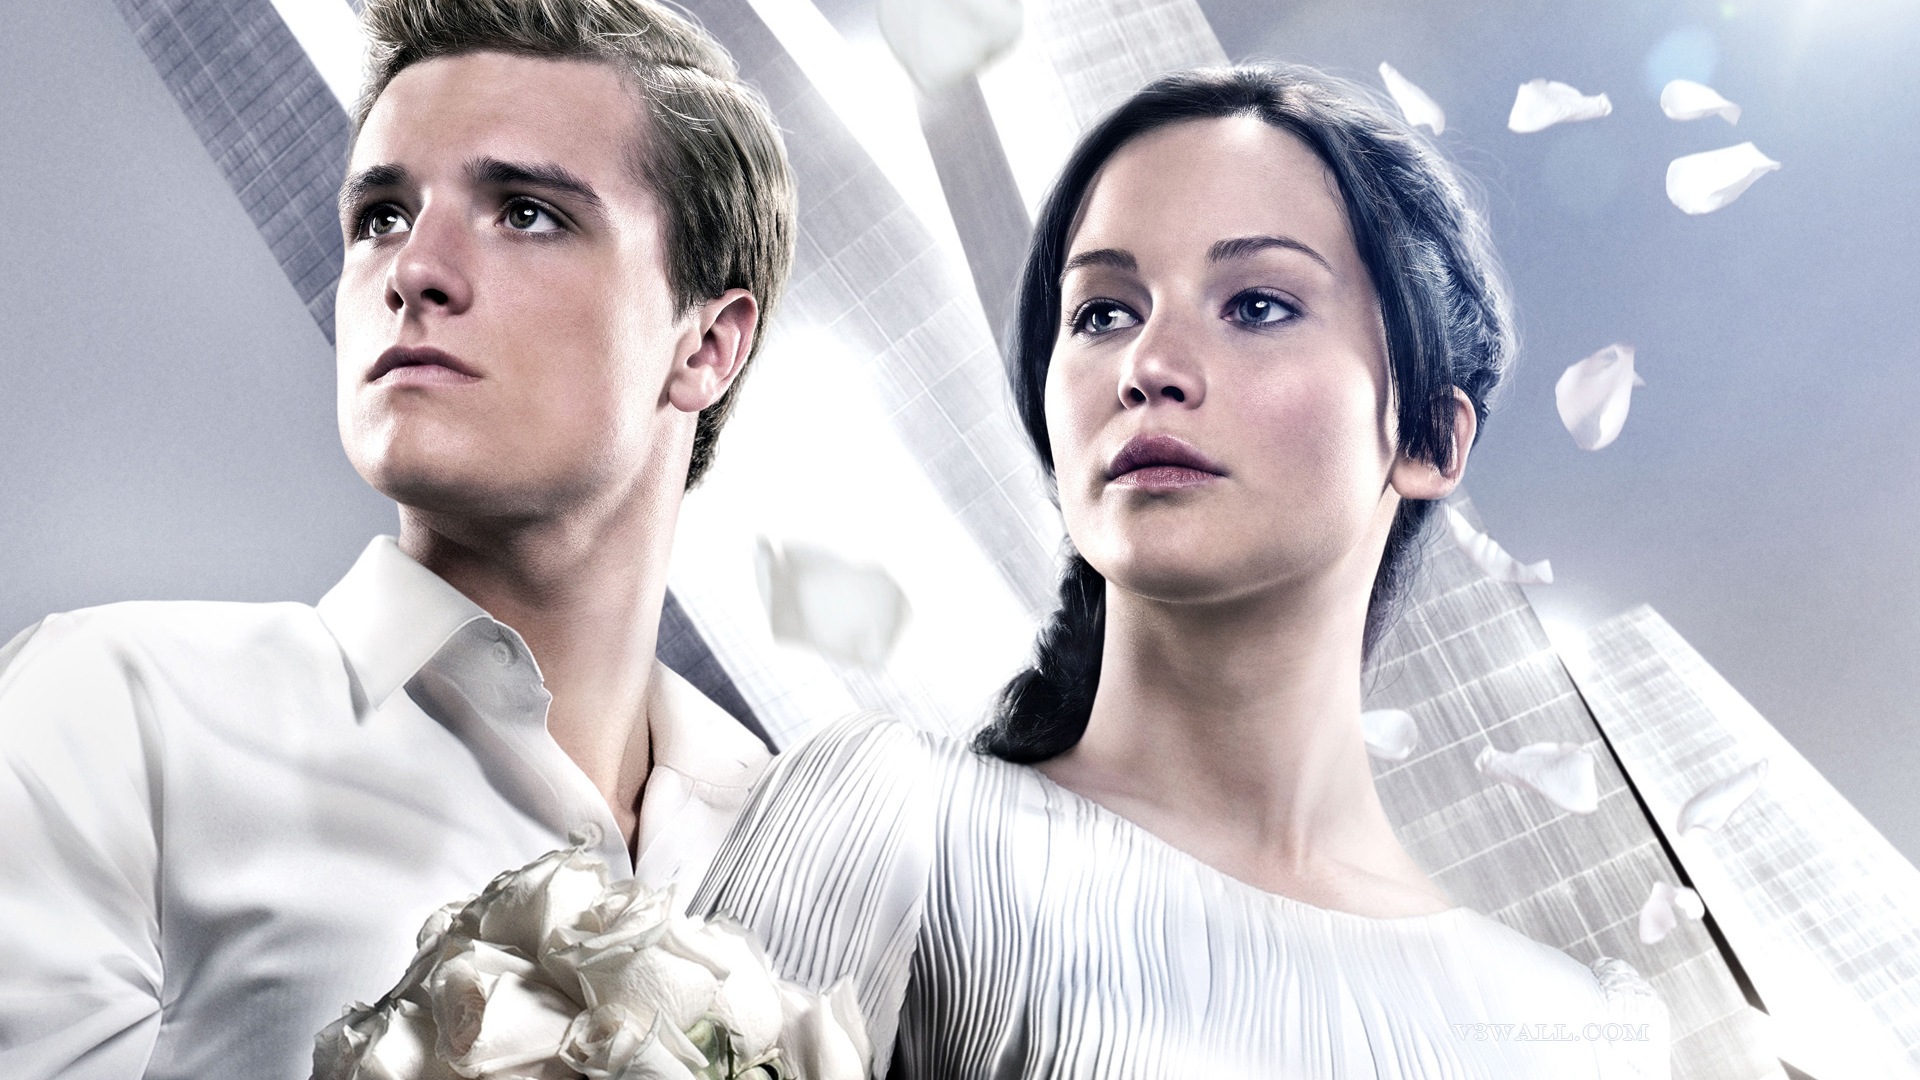 The Hunger Games: Catching Fire wallpapers HD #1 - 1920x1080